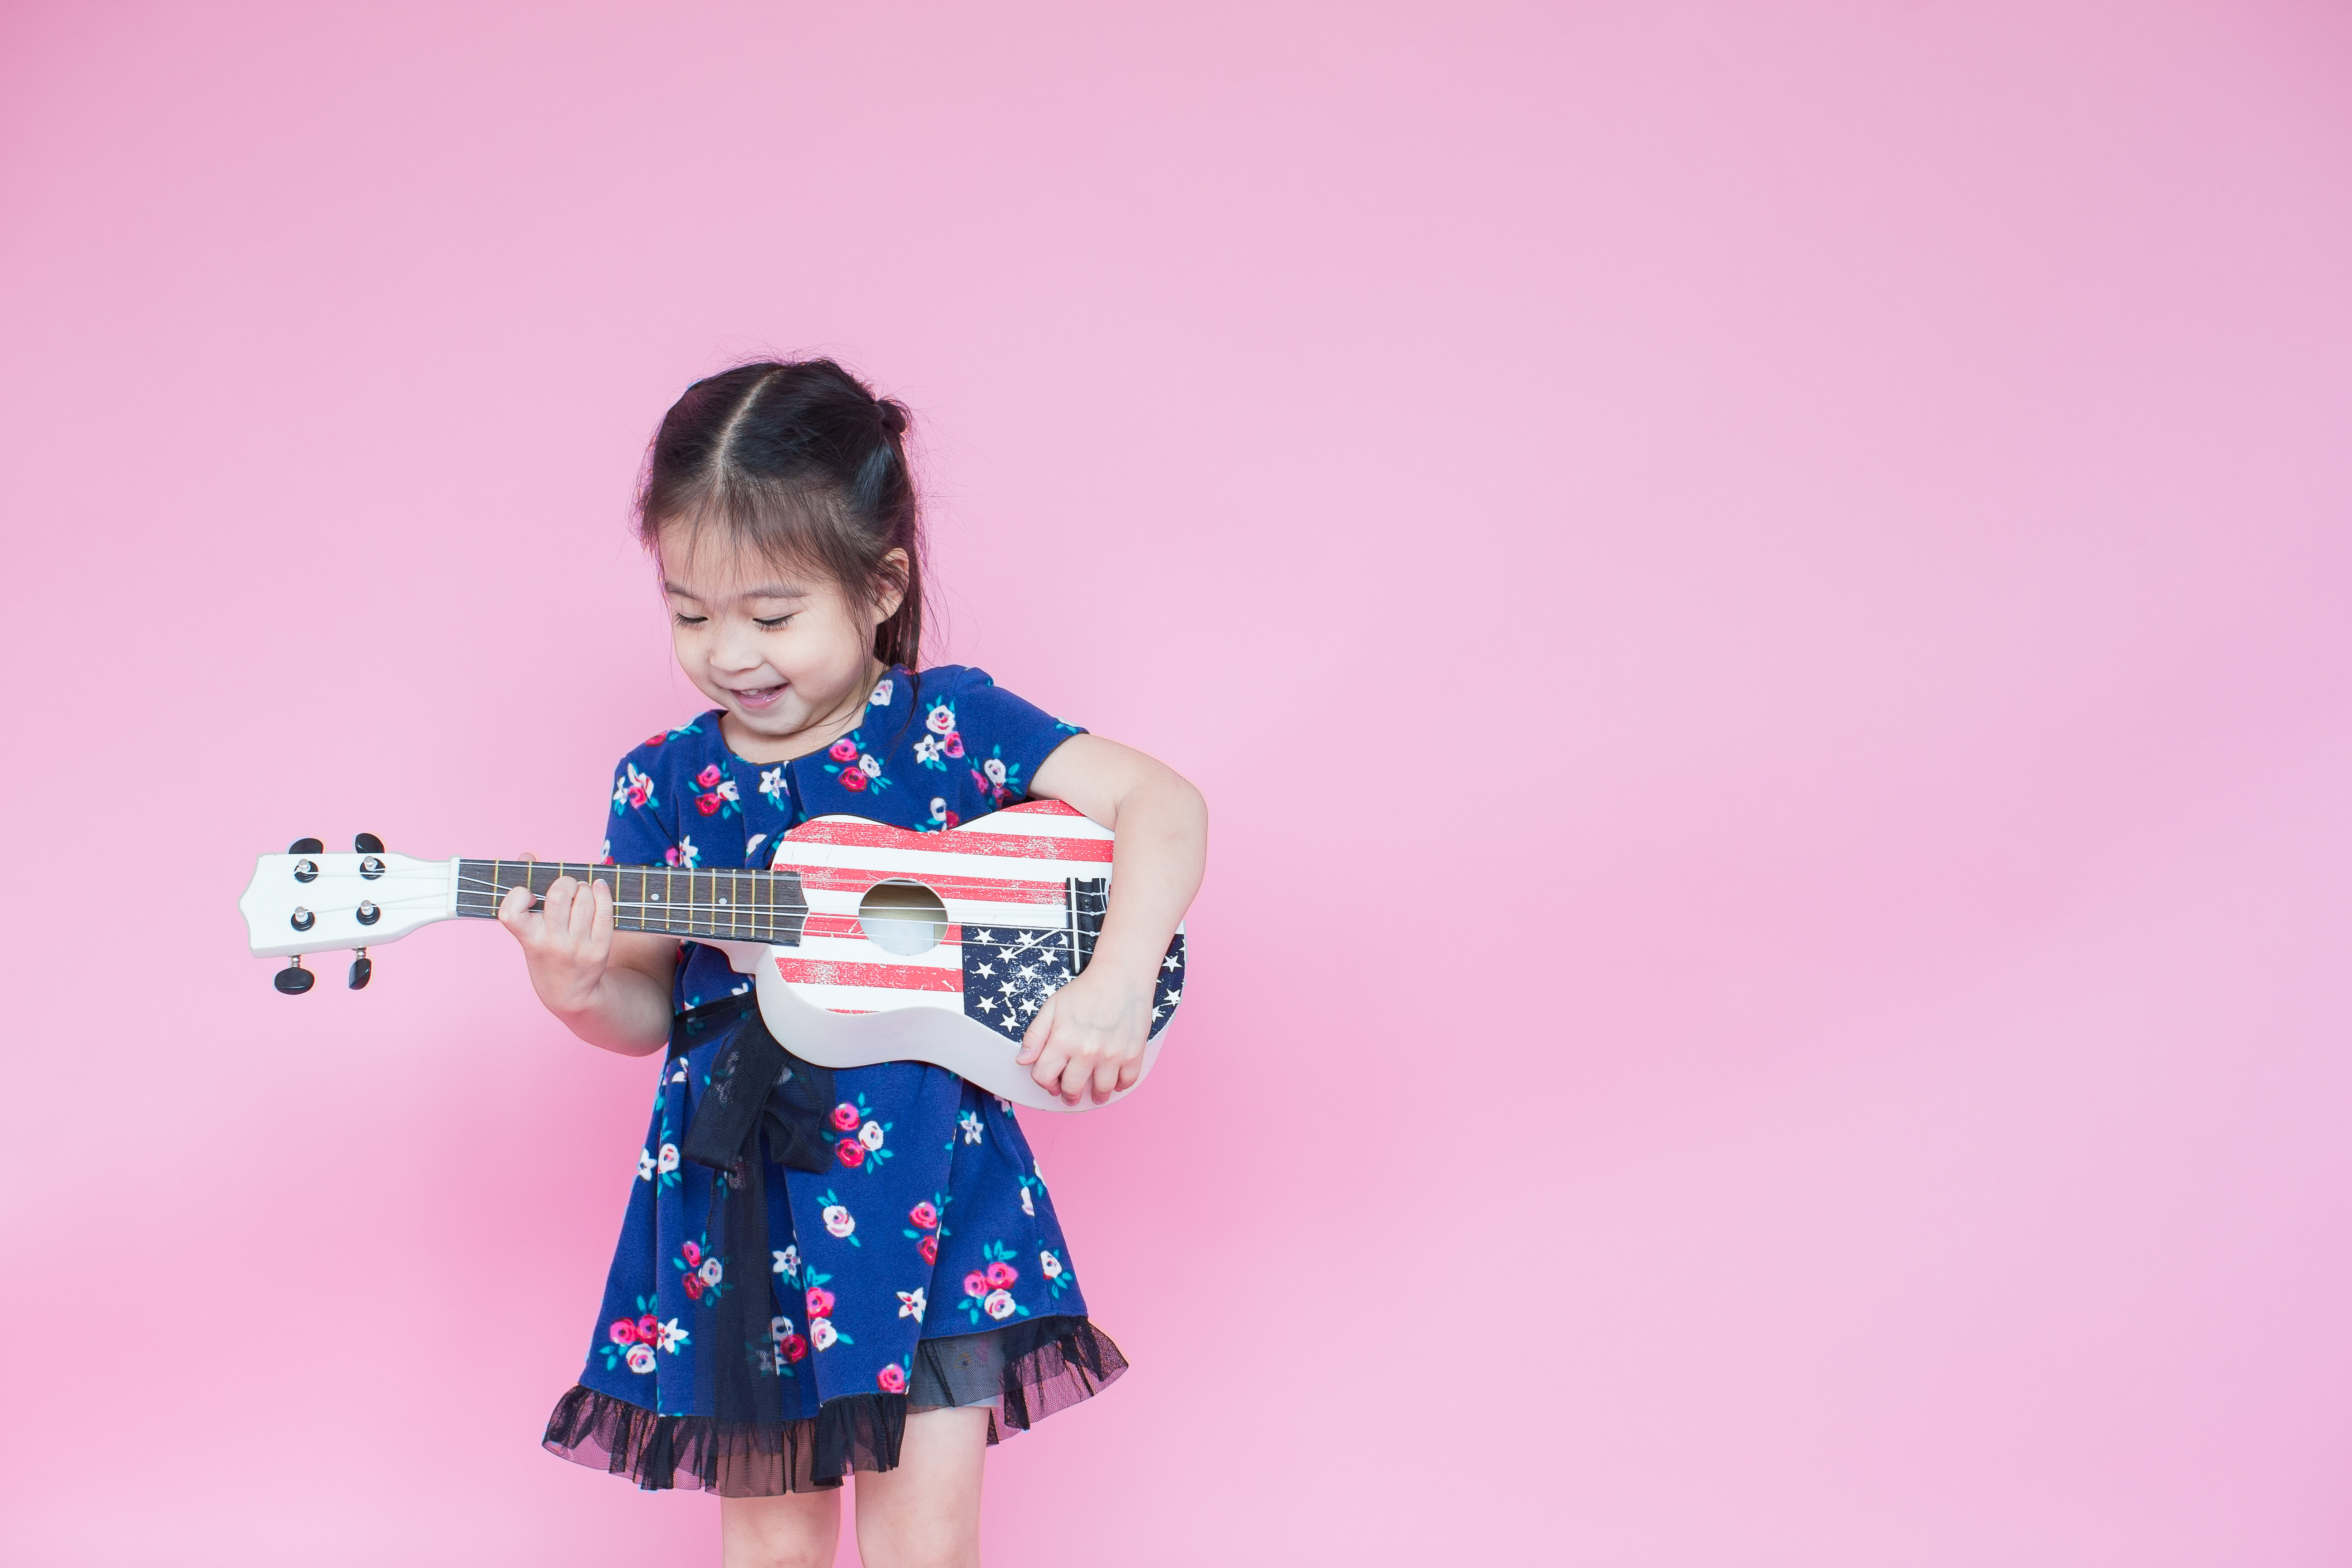 Asian girl wearing a blue dress holding a small guitar with an American flag on it in front of a pink background.